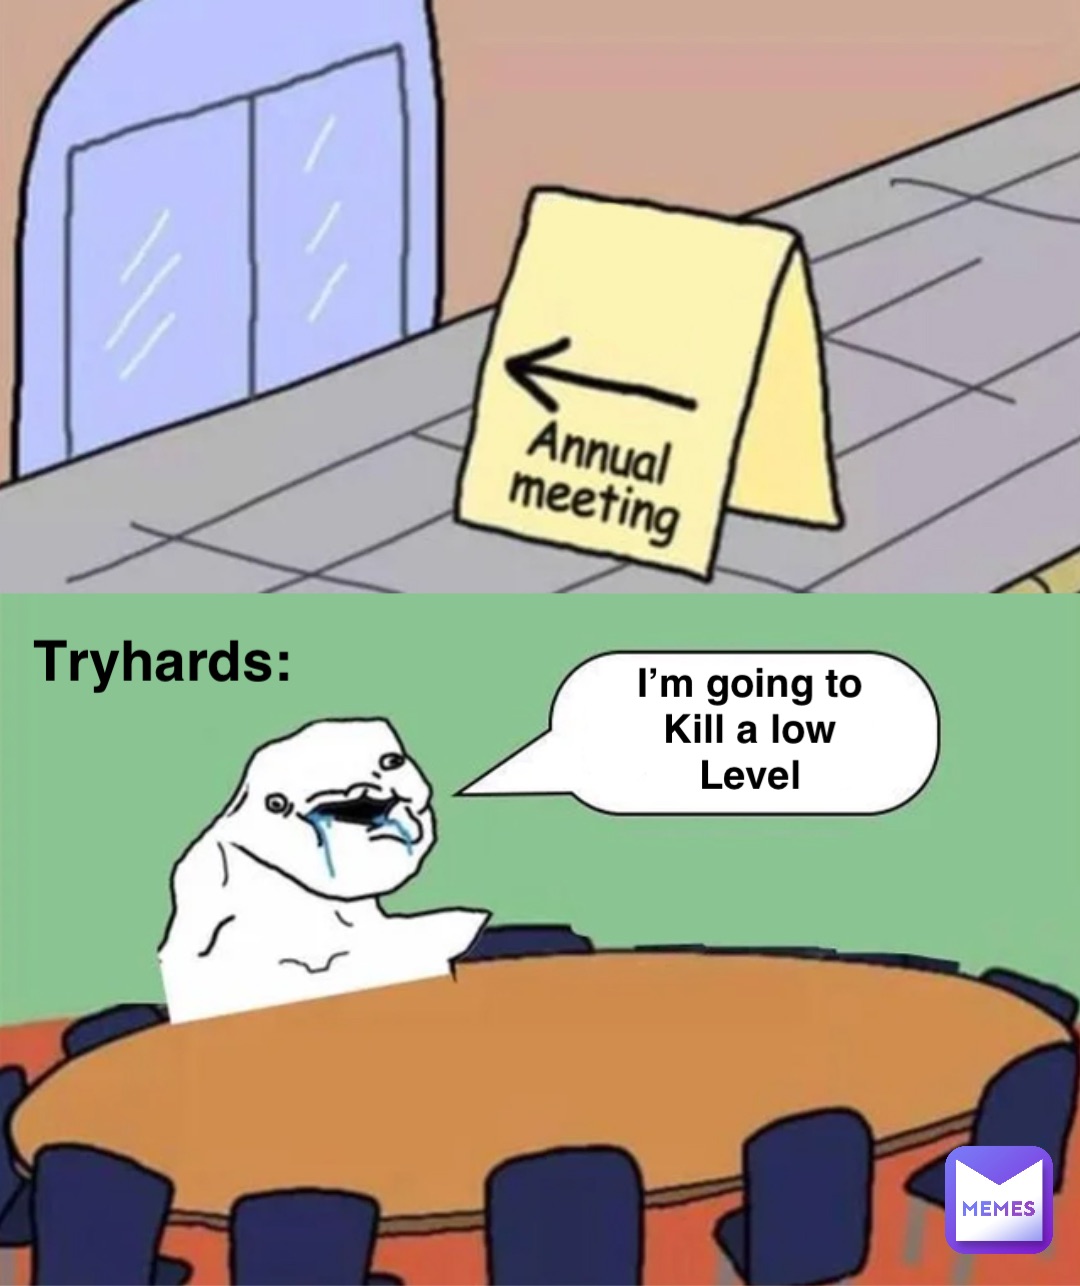 Tryhards: I’m going to
Kill a low
Level